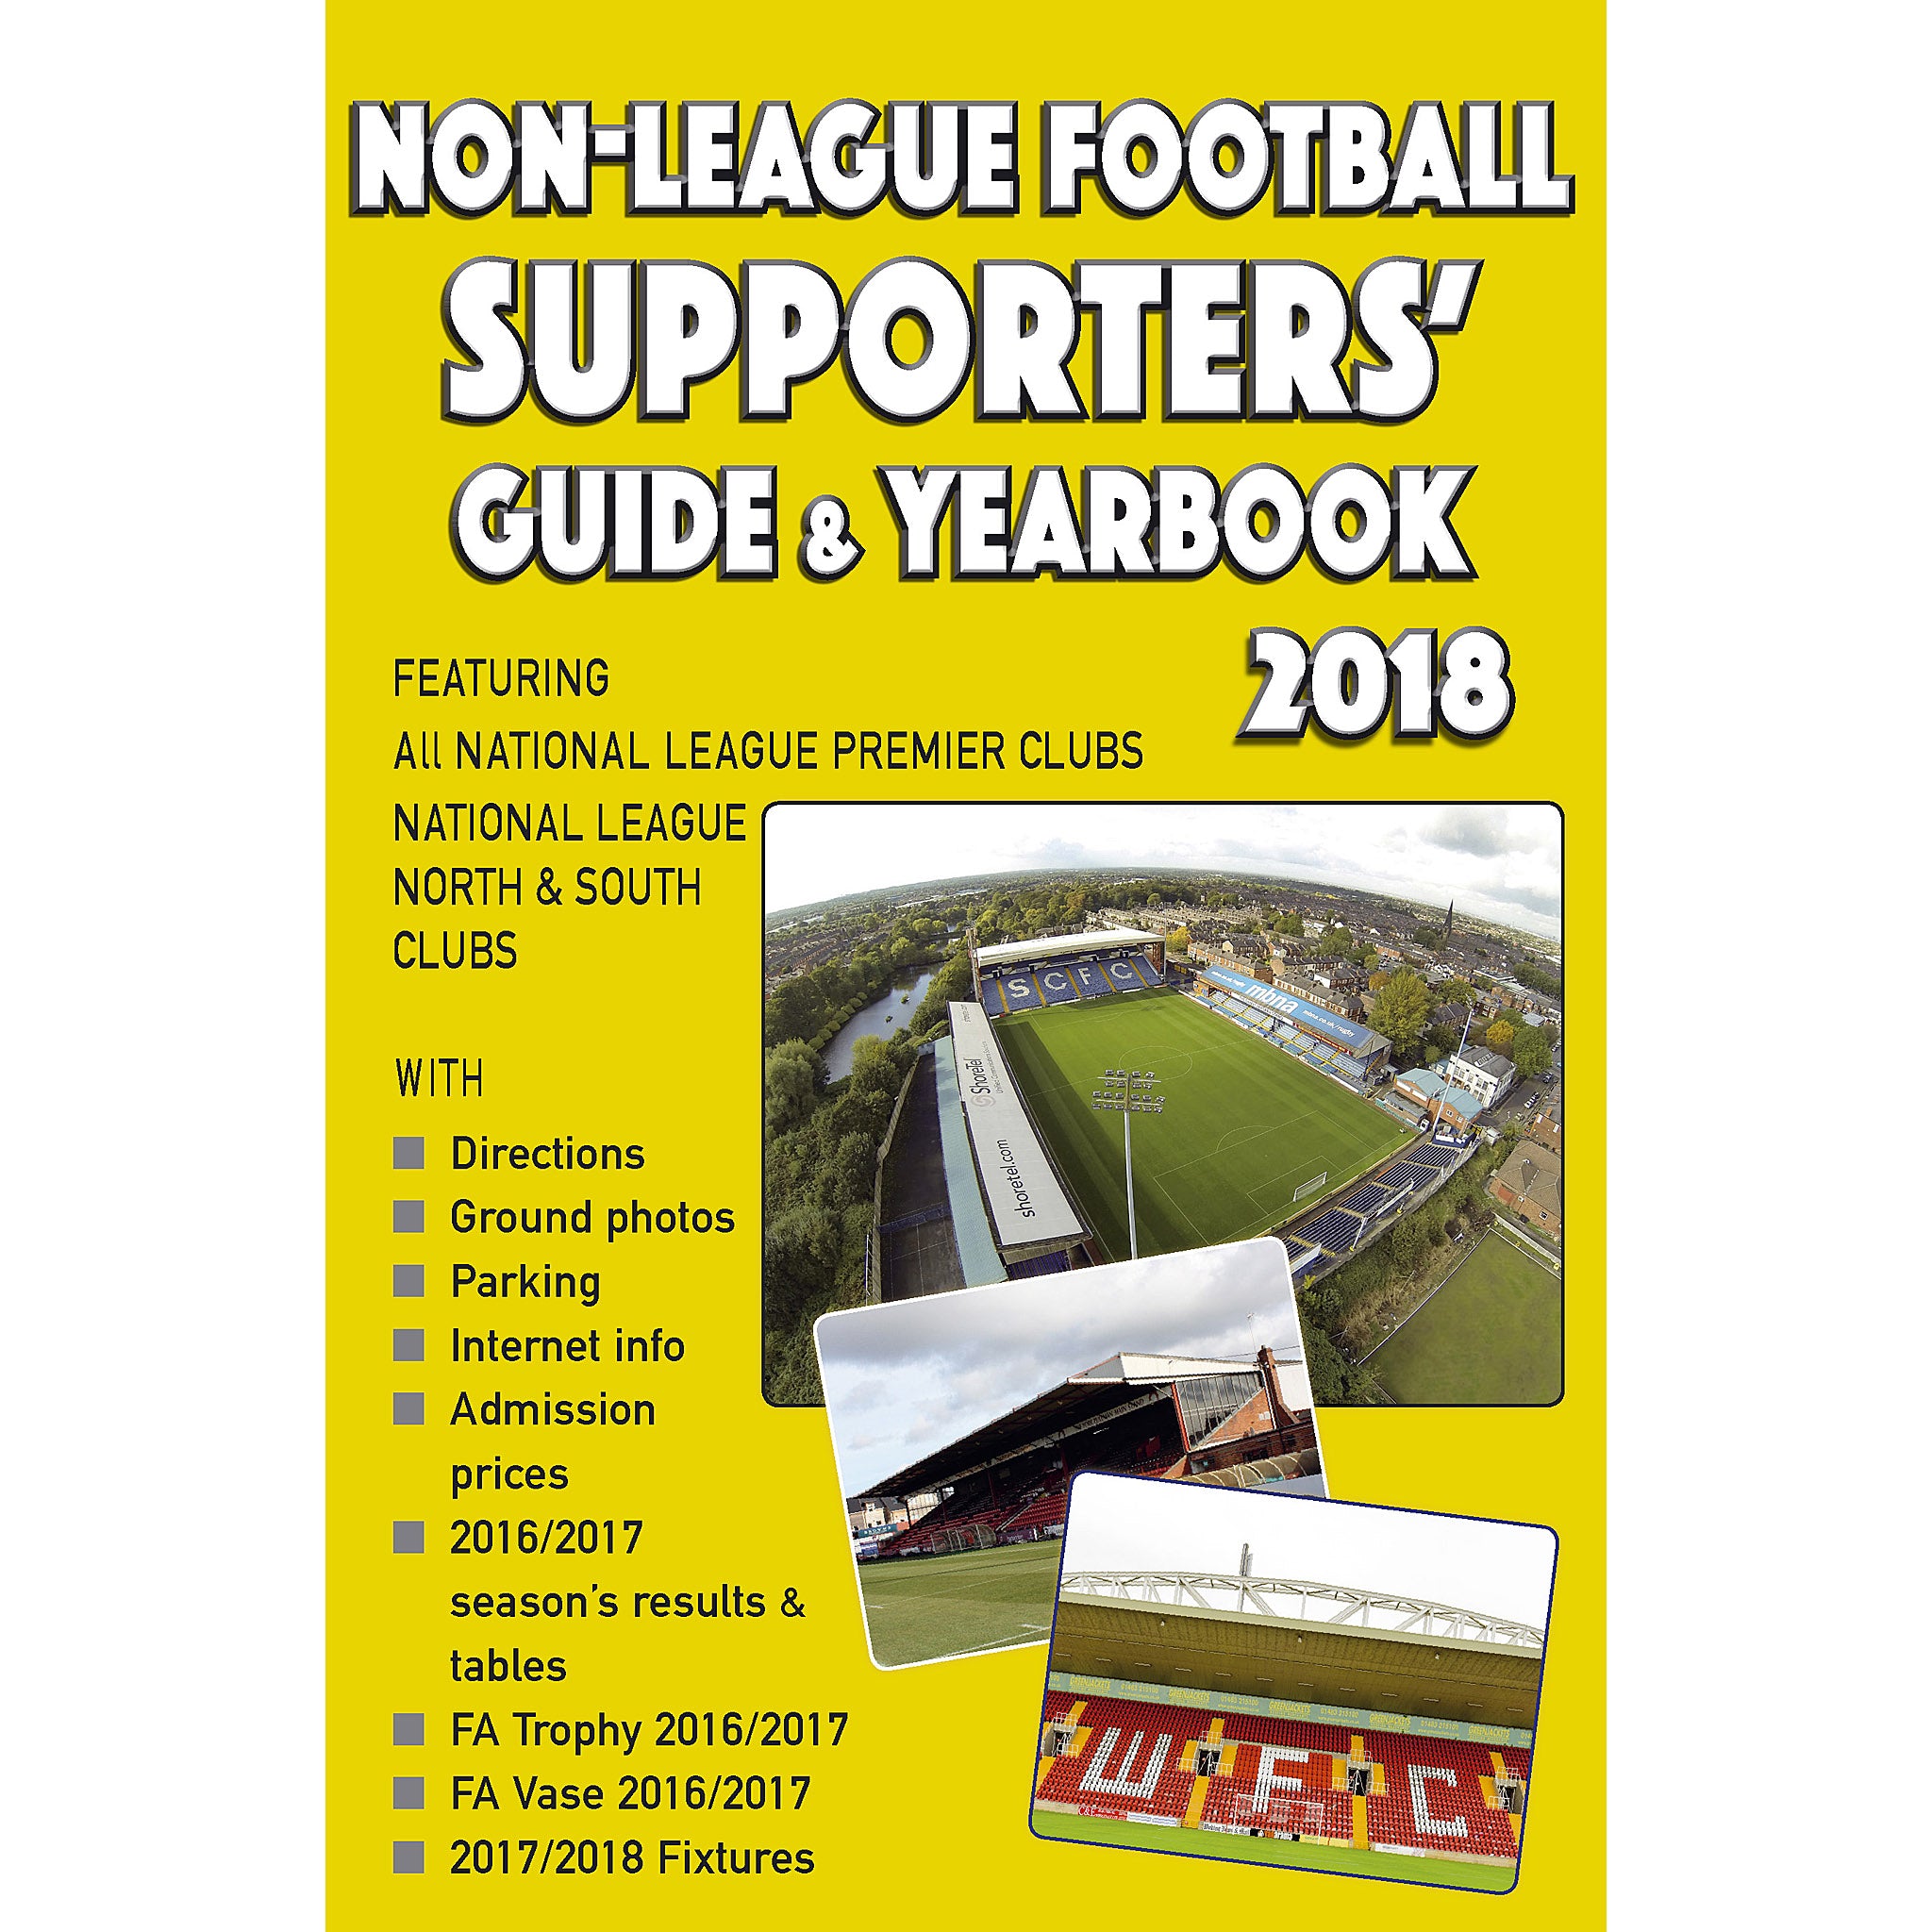 Non-League Football Supporters' Guide & Yearbook 2018